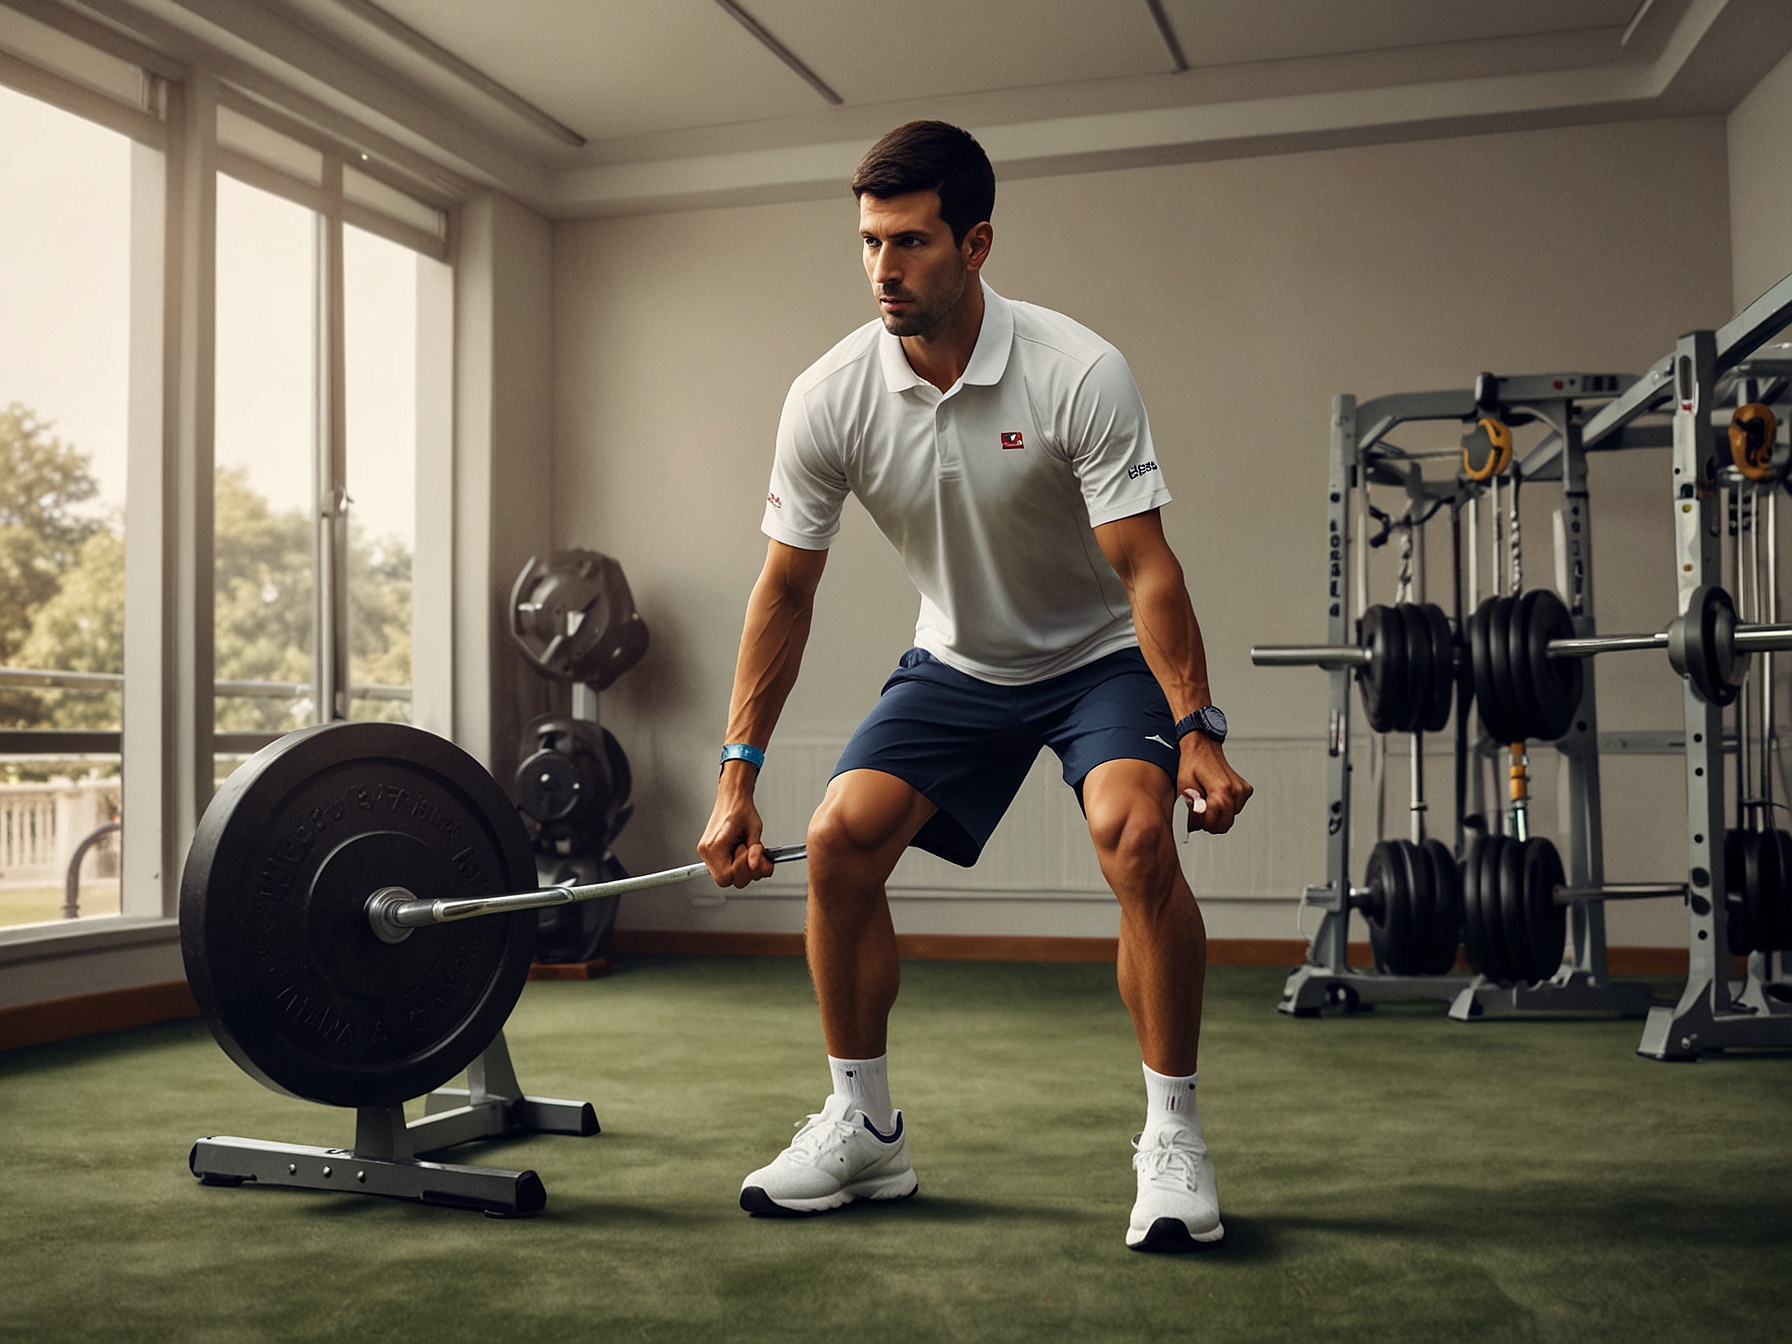 Novak Djokovic performs a series of knee strengthening exercises in a gym, showcasing his dedication and intense recovery routine post-surgery ahead of the Wimbledon Championships.